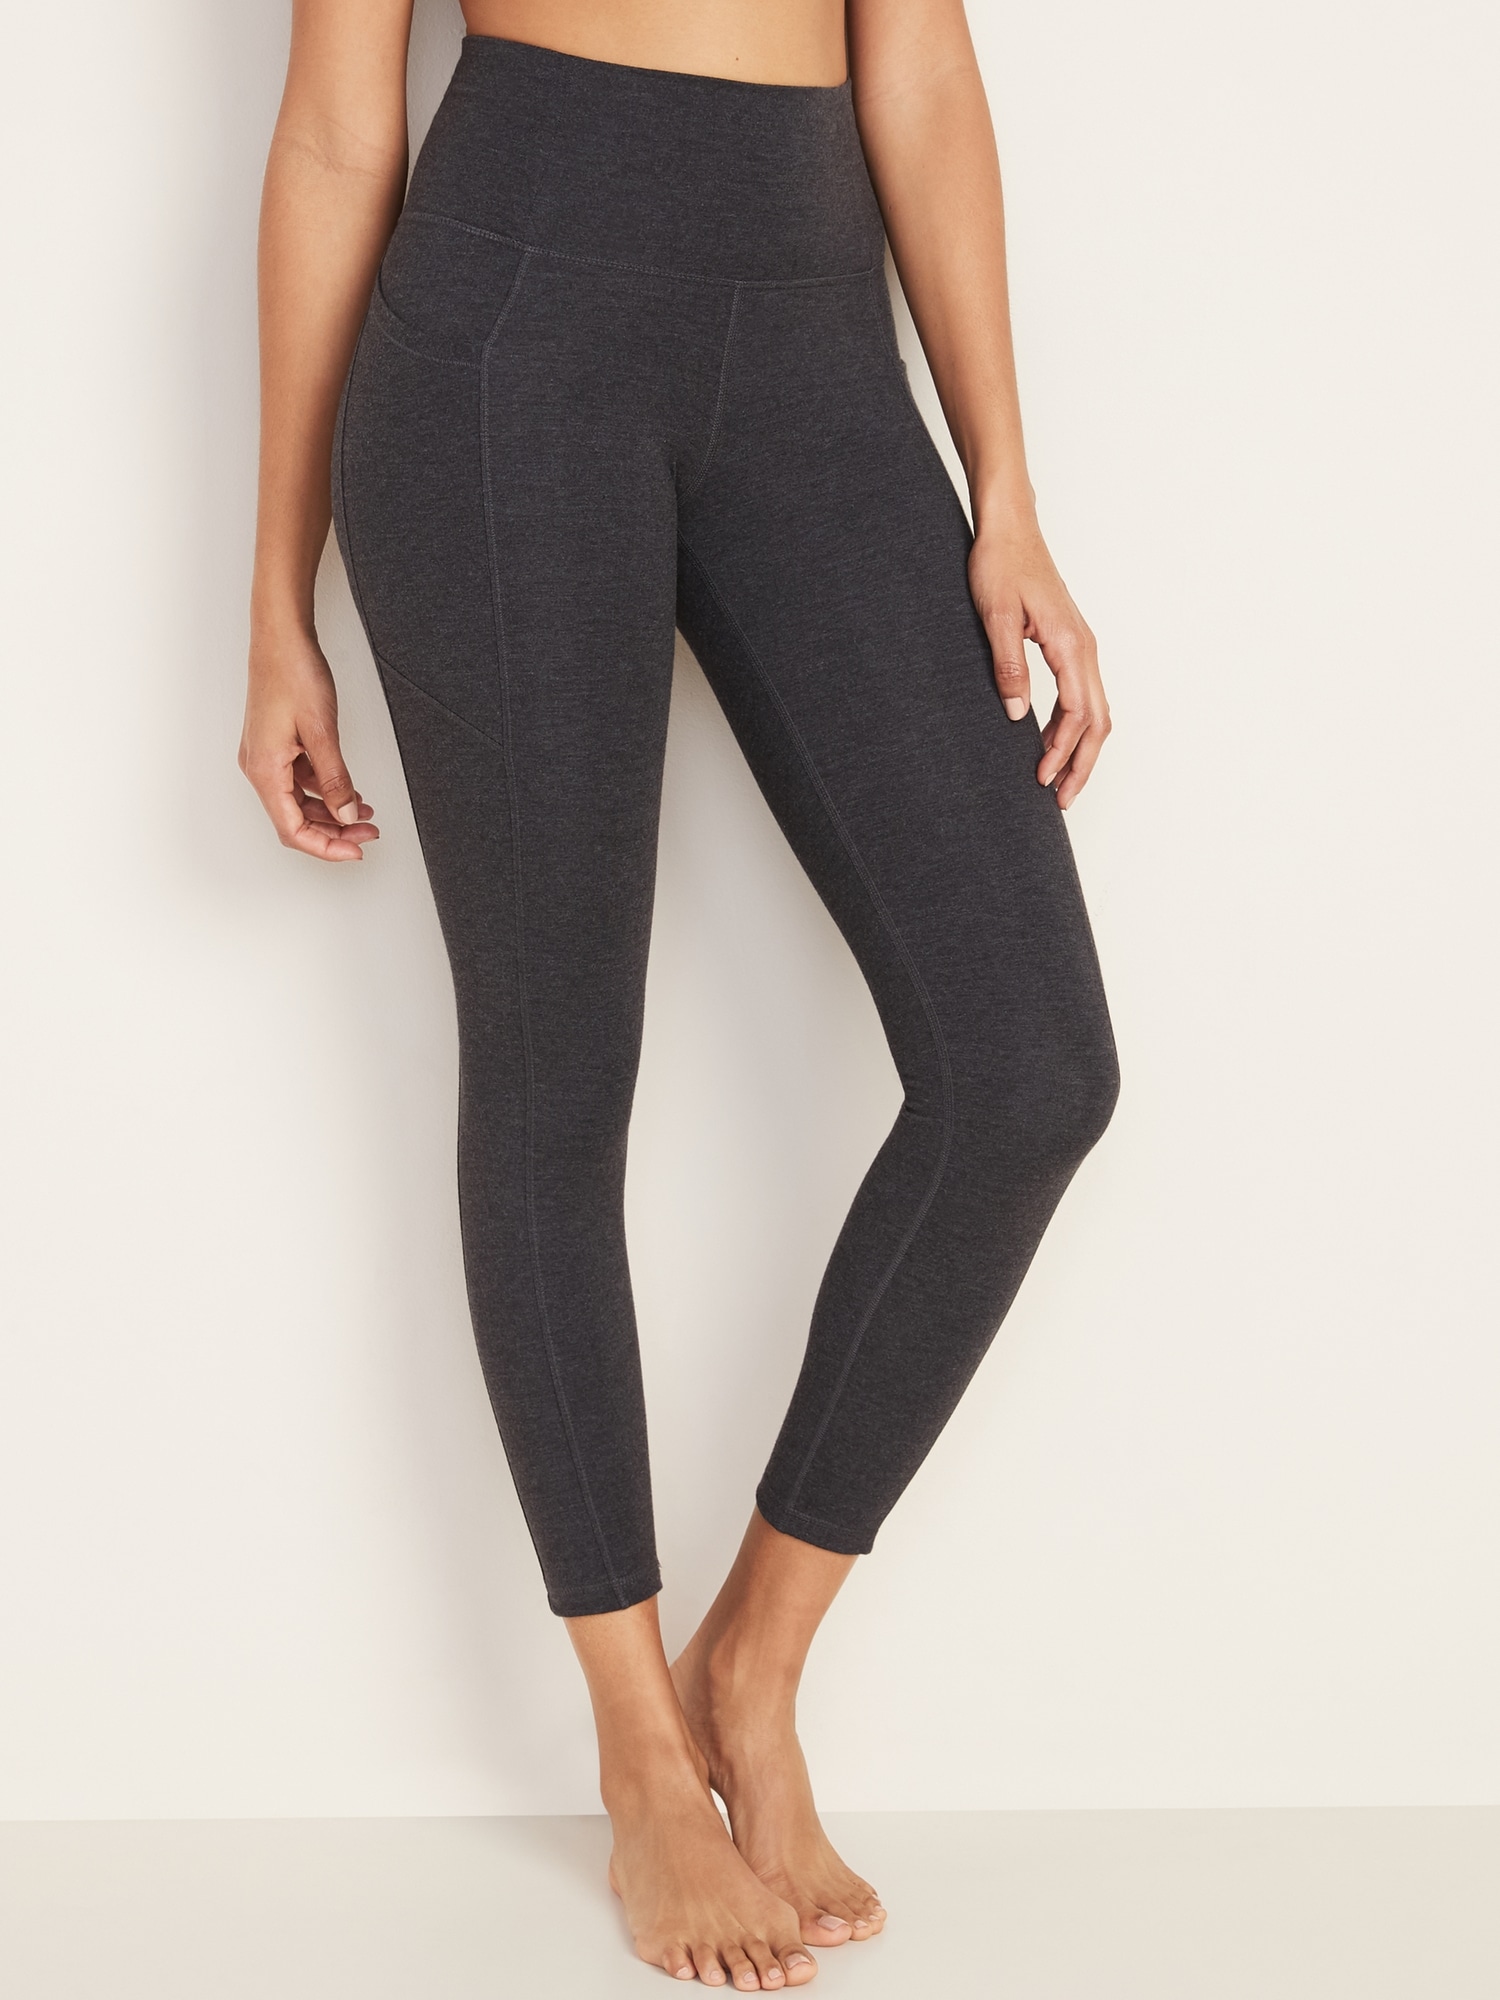 high rise leggings with pockets